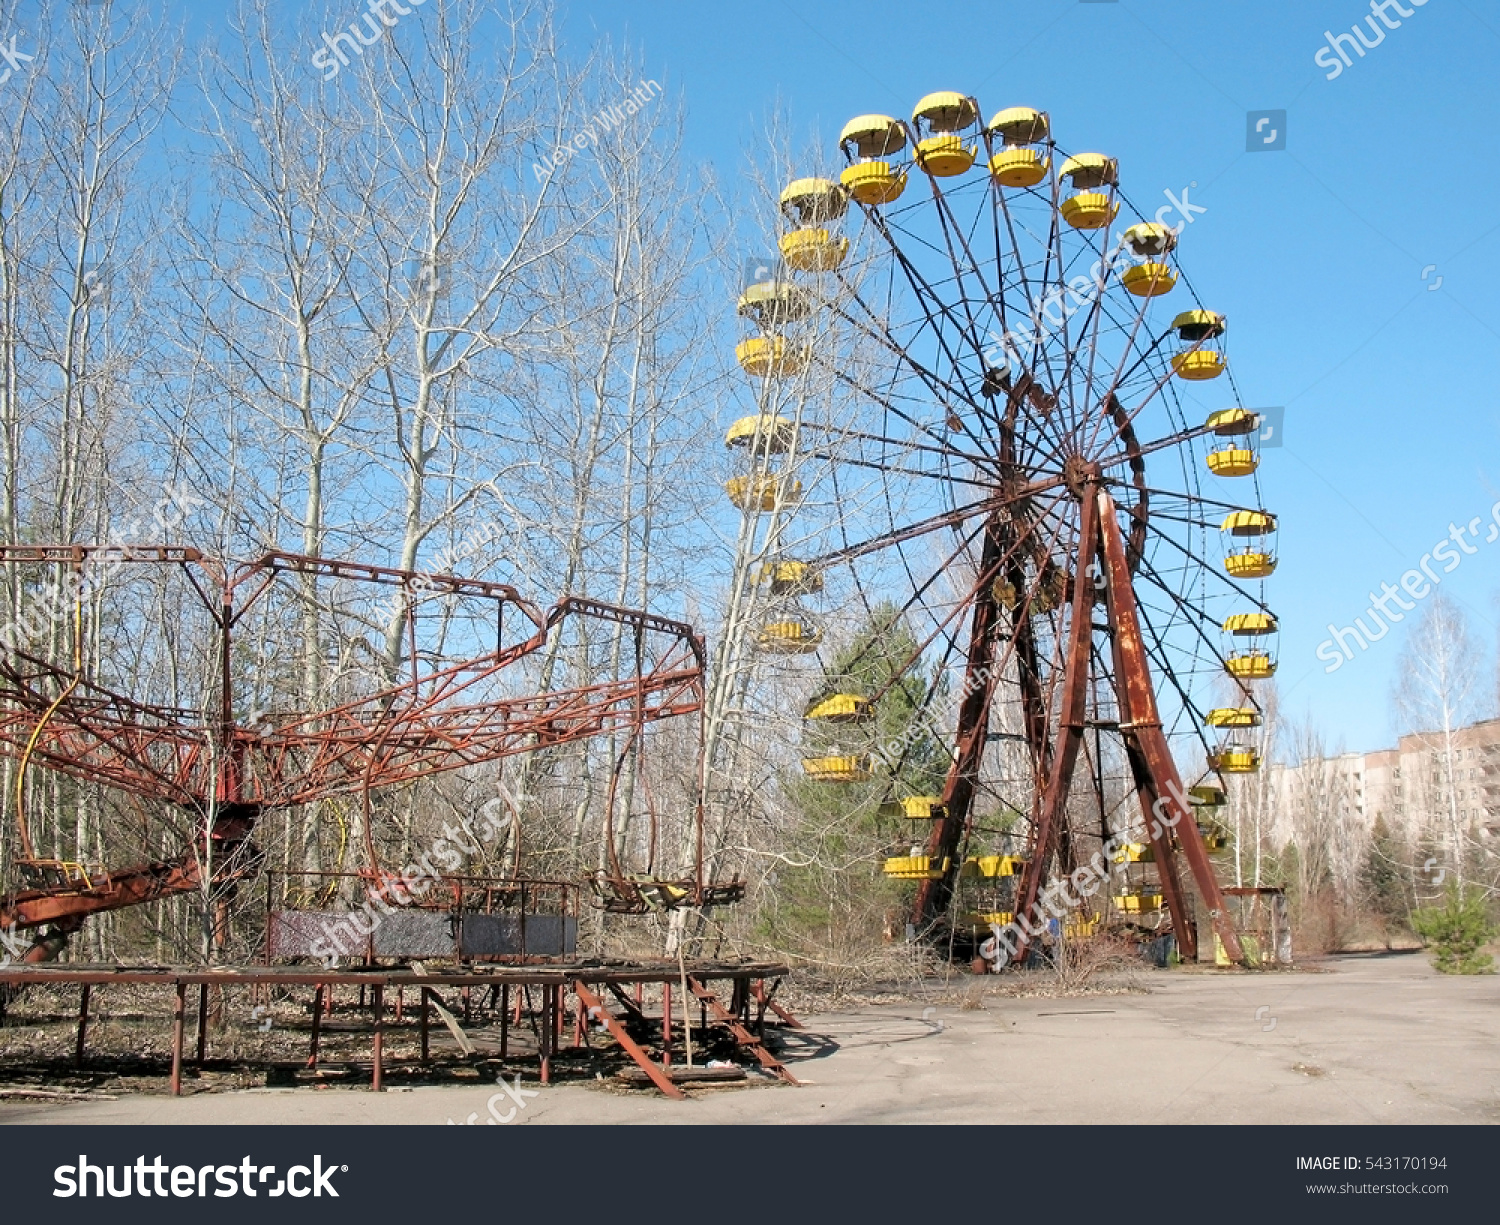 Ferris wheel in an unfinished Amusement Park in Chernobyl #543170194